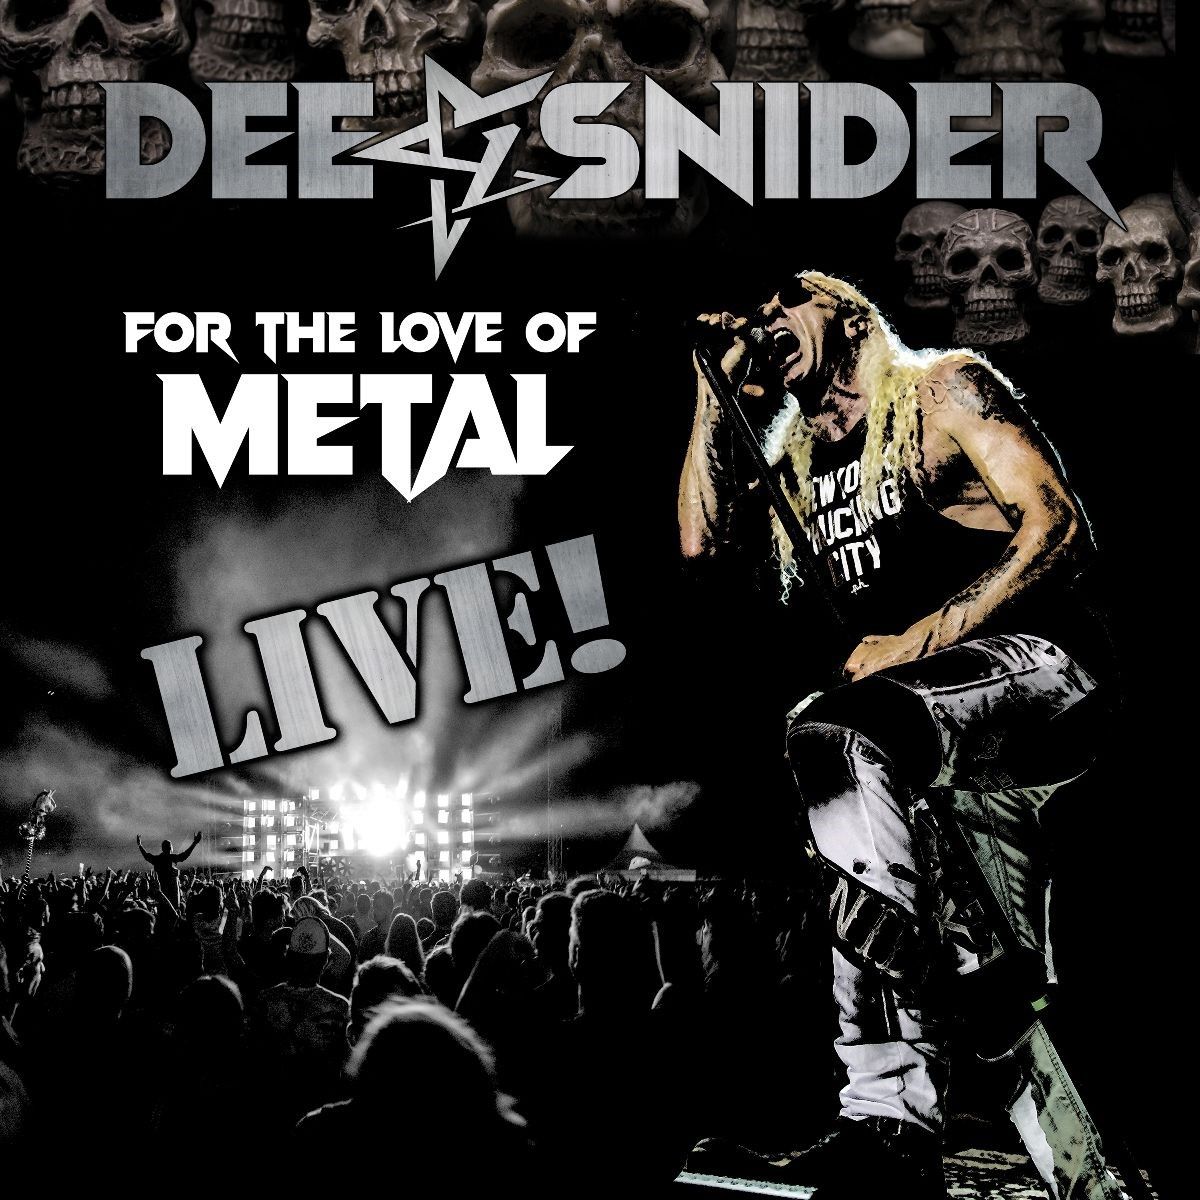 'For The Love Of Metal'-Live-Clip ist online